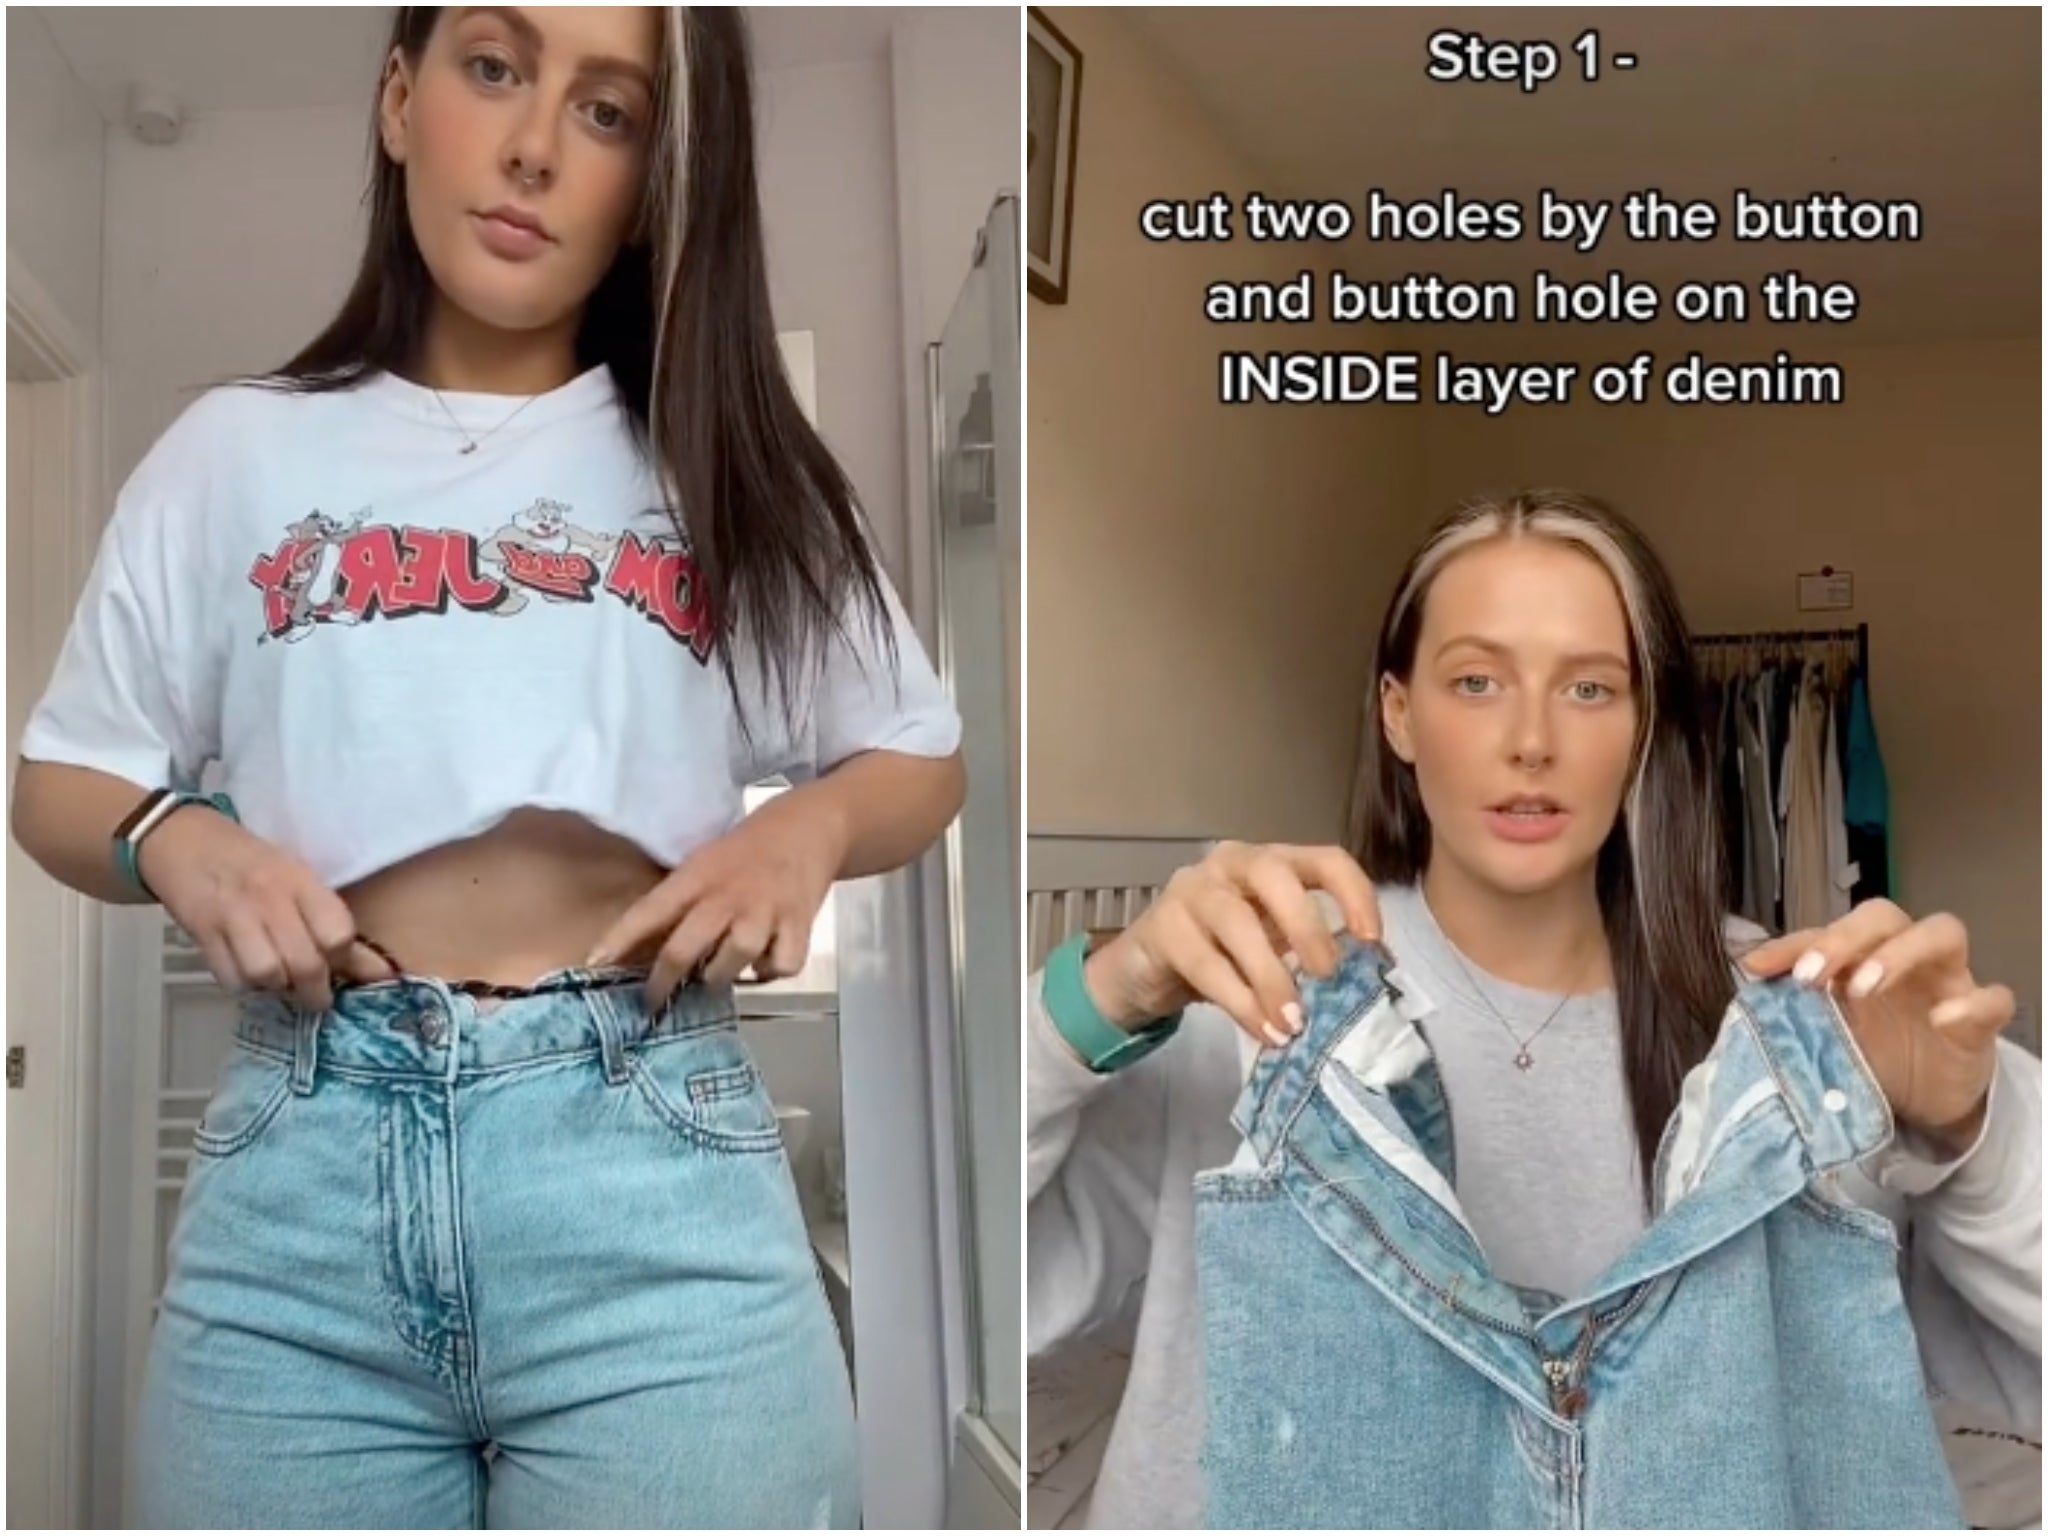 TikTok Hack Shows How to Find the Perfect Jeans Without Trying Them on